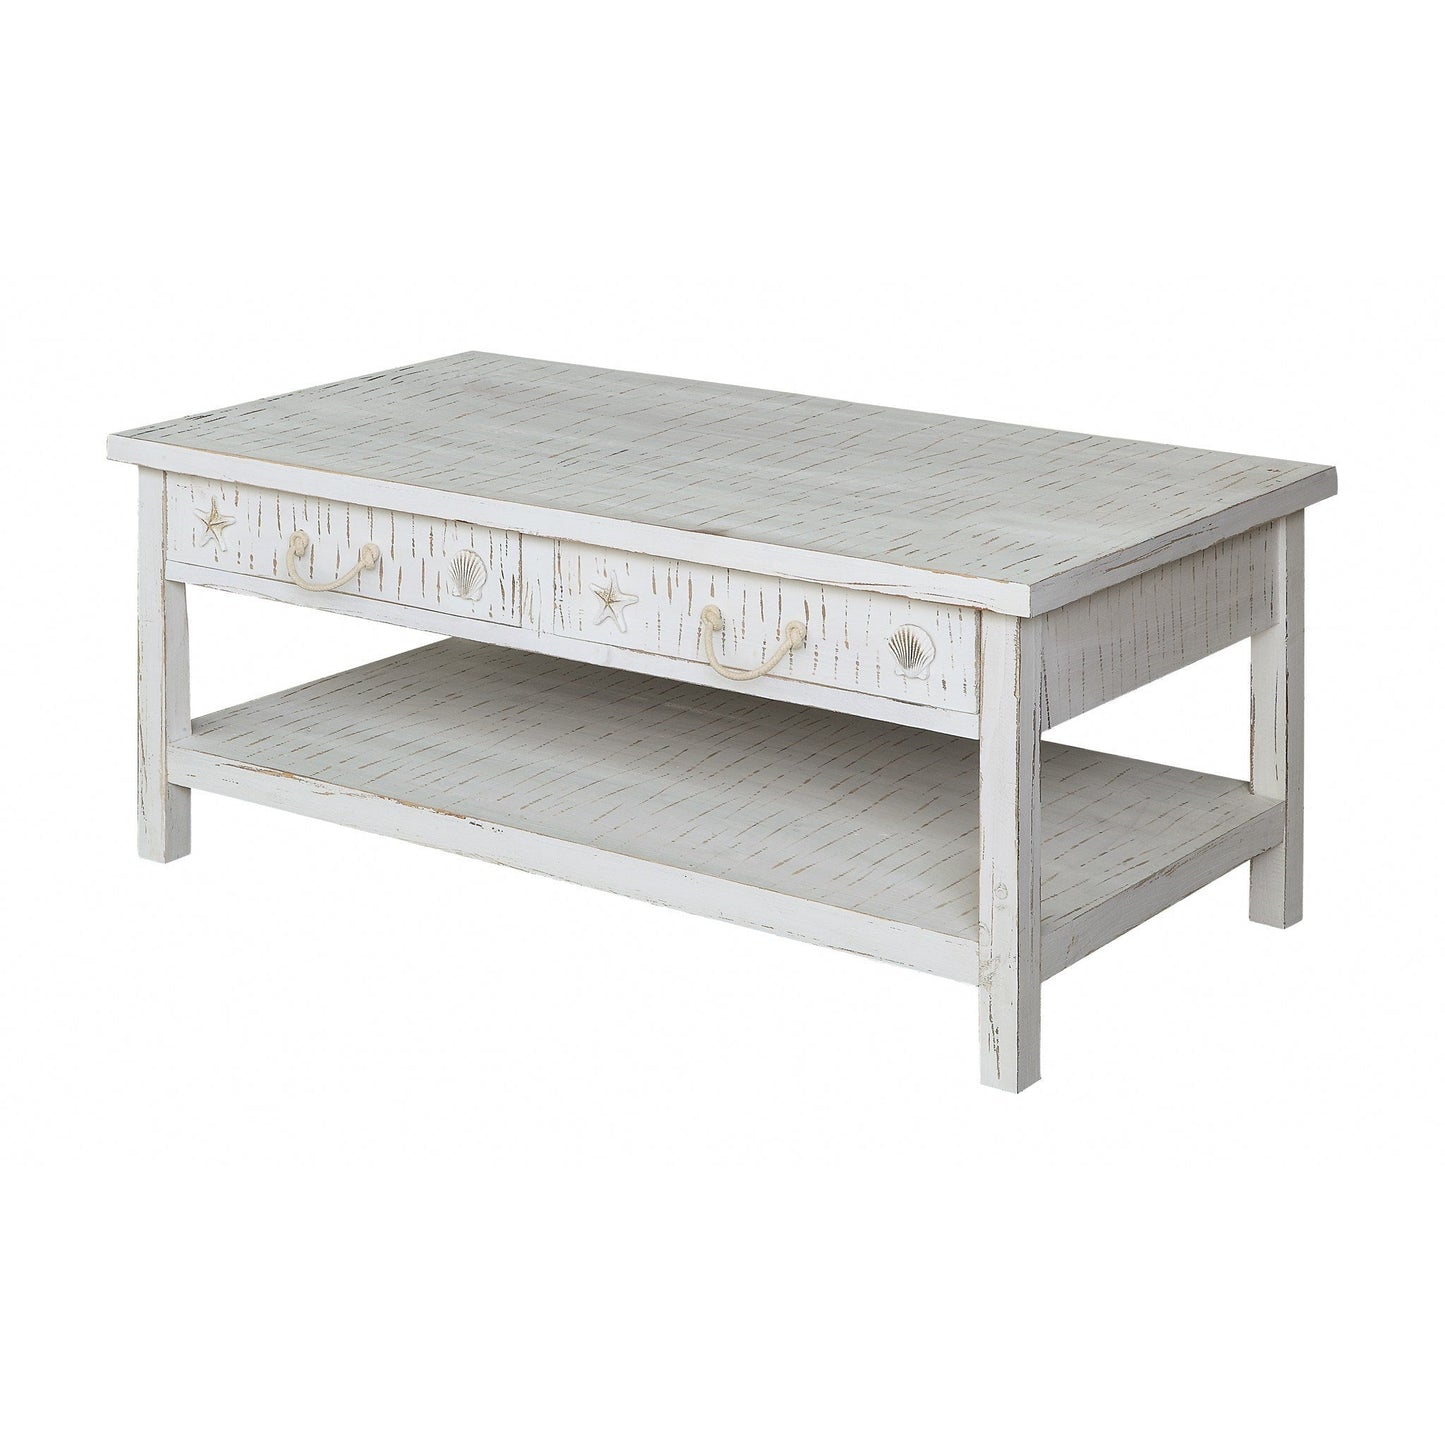 Crestview Collection Seaside 48" x 26" x 20" Ocassional Wood Cocktail Table